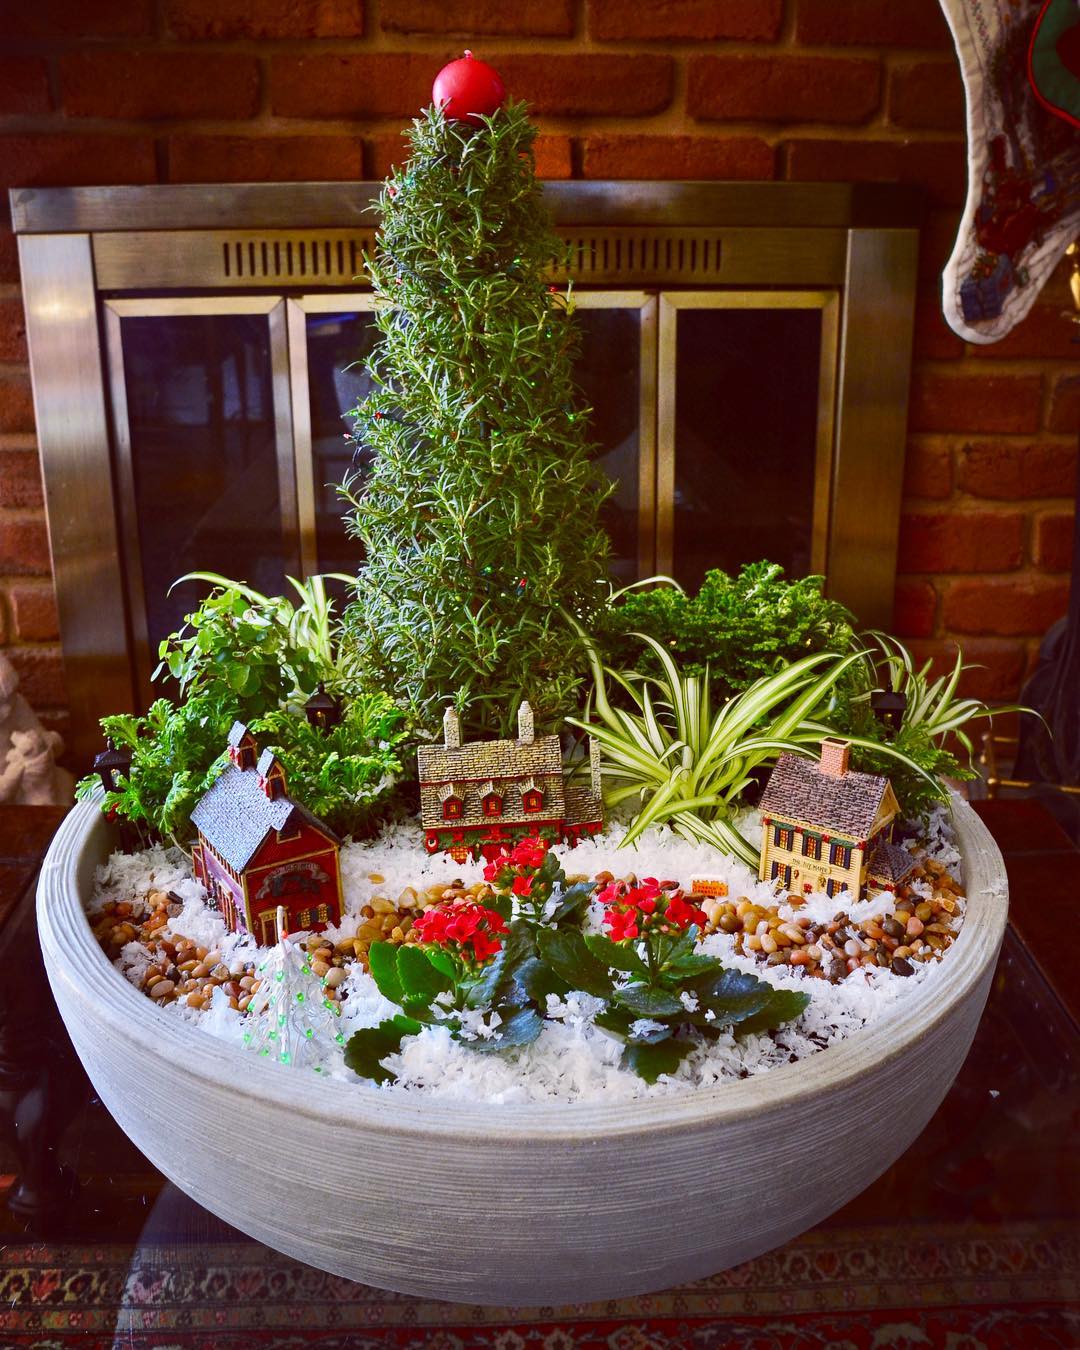 Create a Christmas scene with live plants in a pot as a fun family project